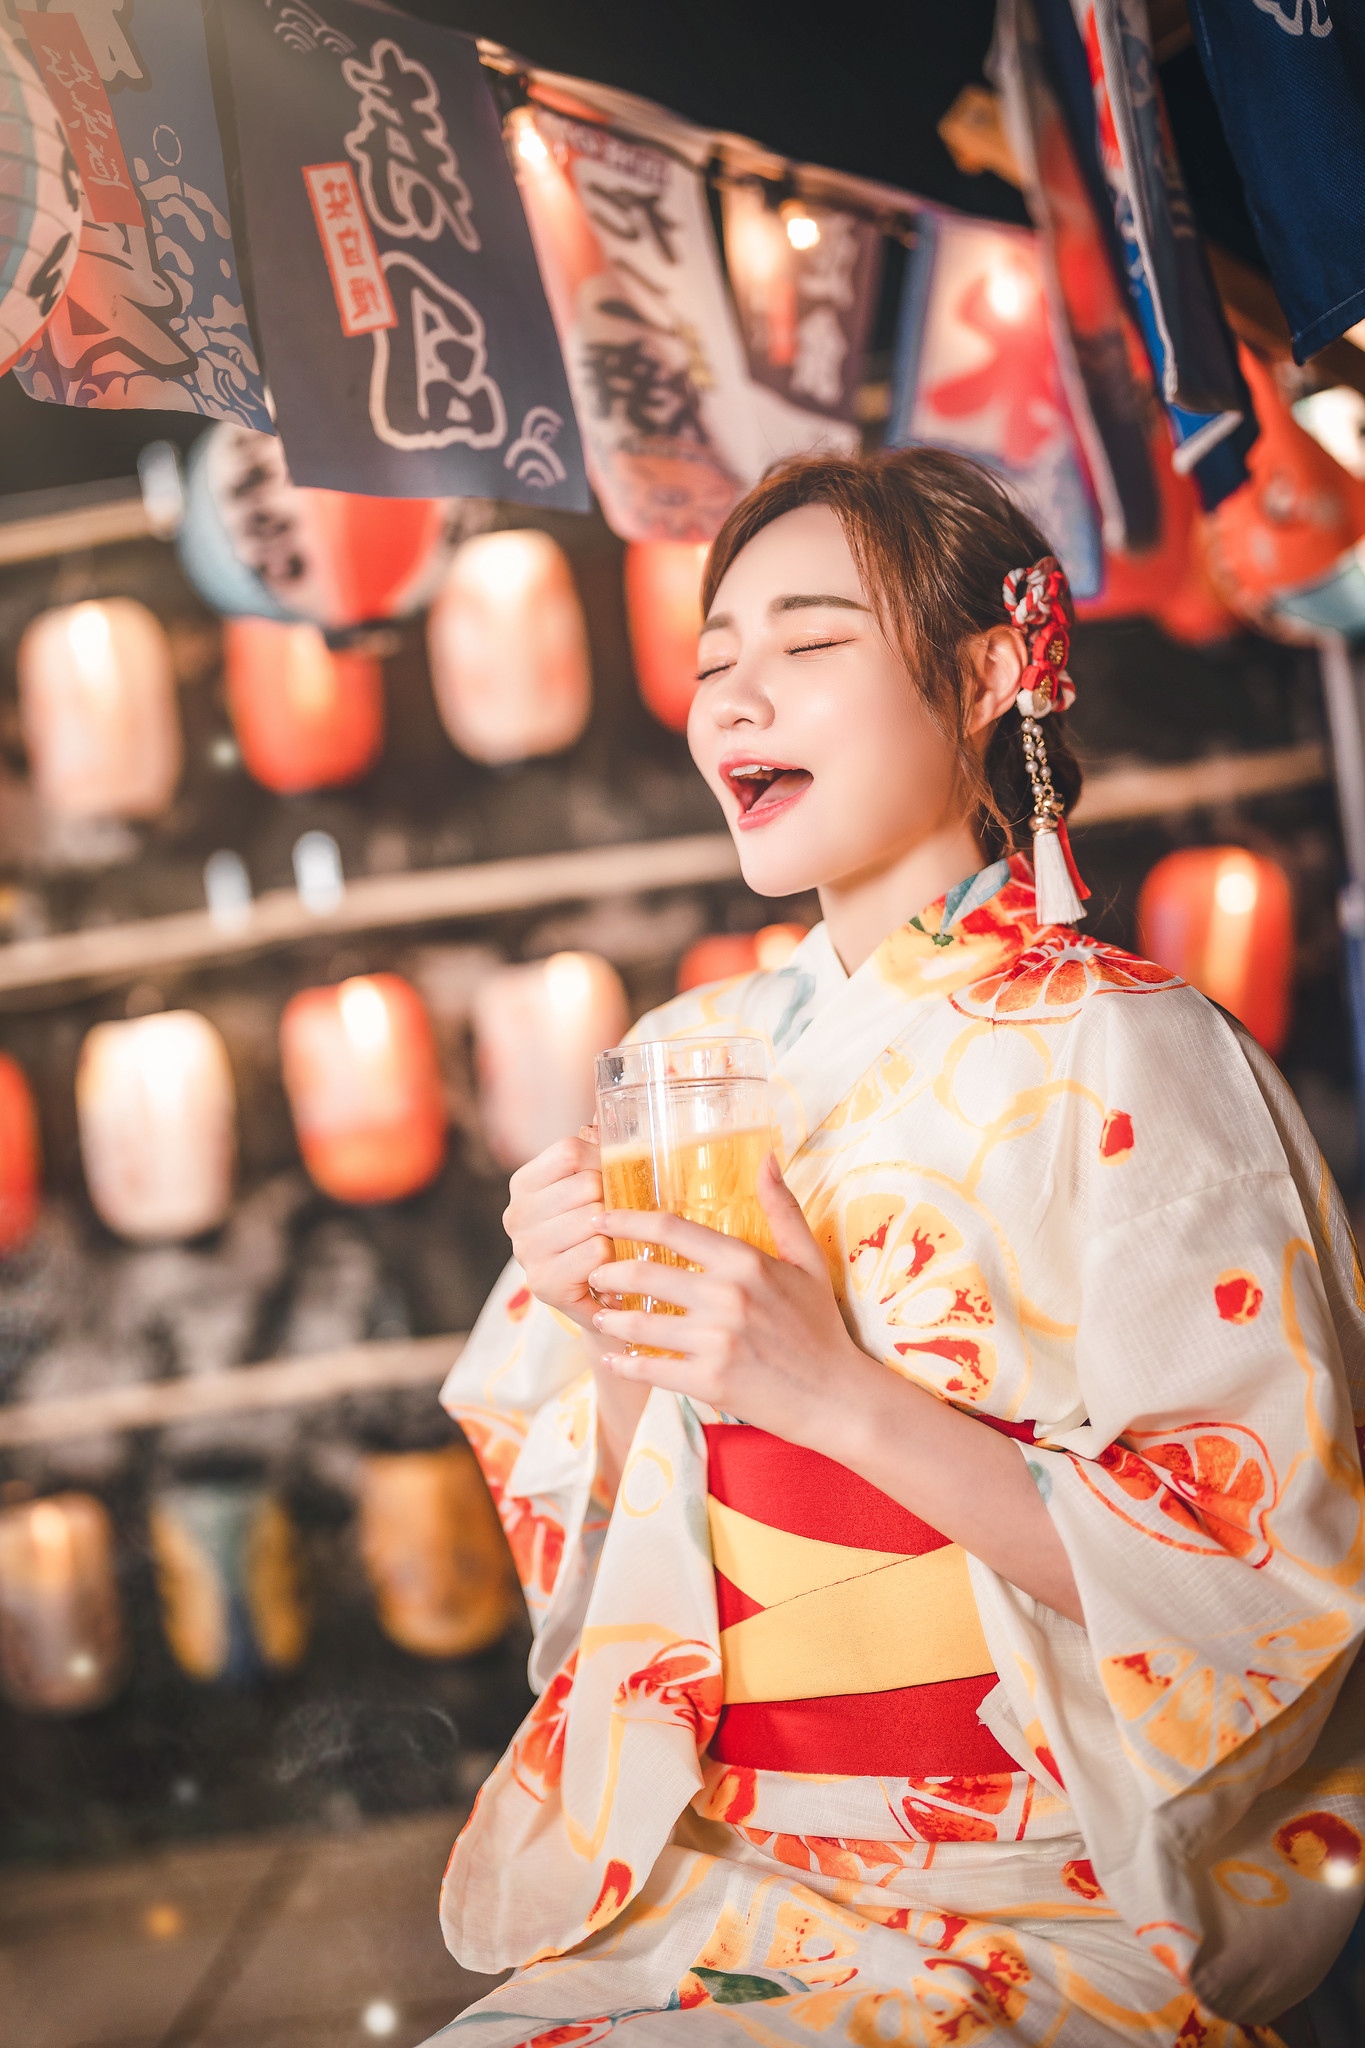 Asian Women Model Dress Open Mouth Closed Eyes Traditional Clothing Brunette Food Beer Alcohol Beer  1365x2048